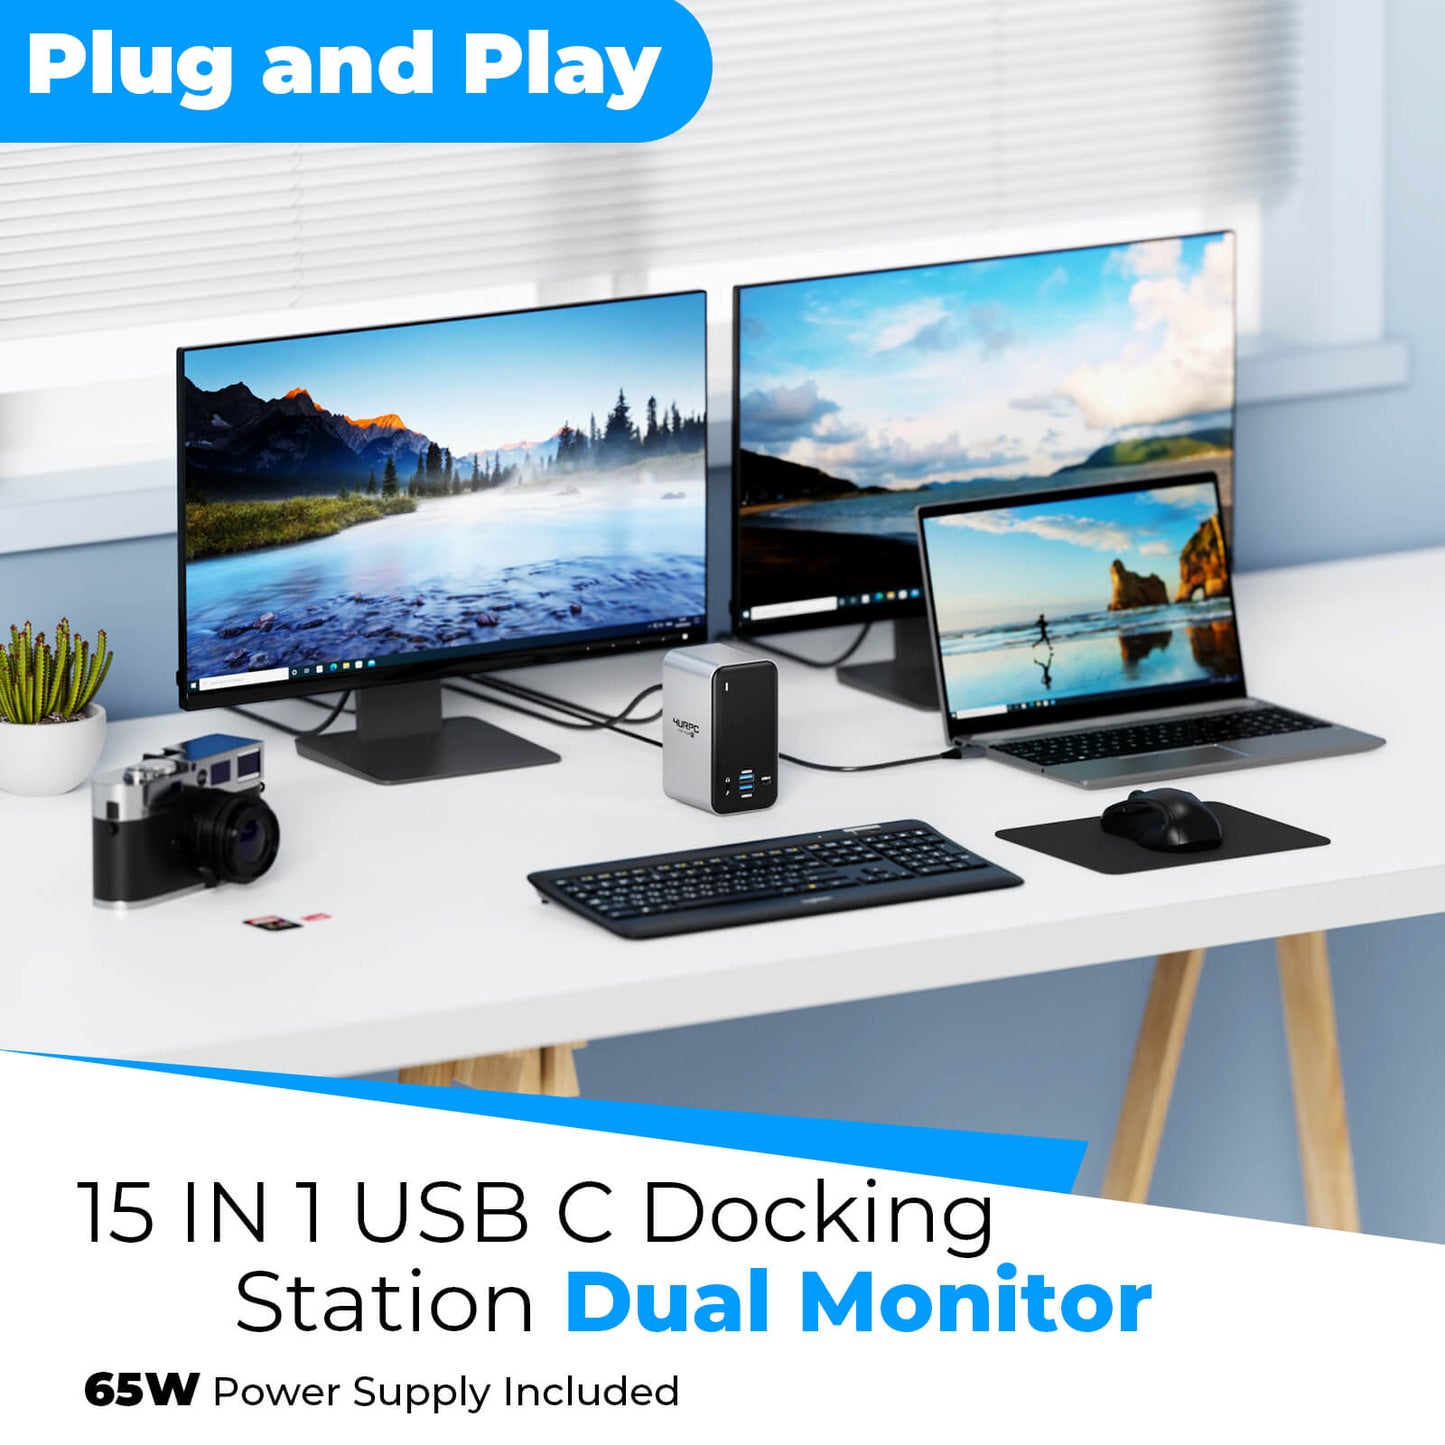 Plug and play 15 in 1 USB C docking station dual monitor dock